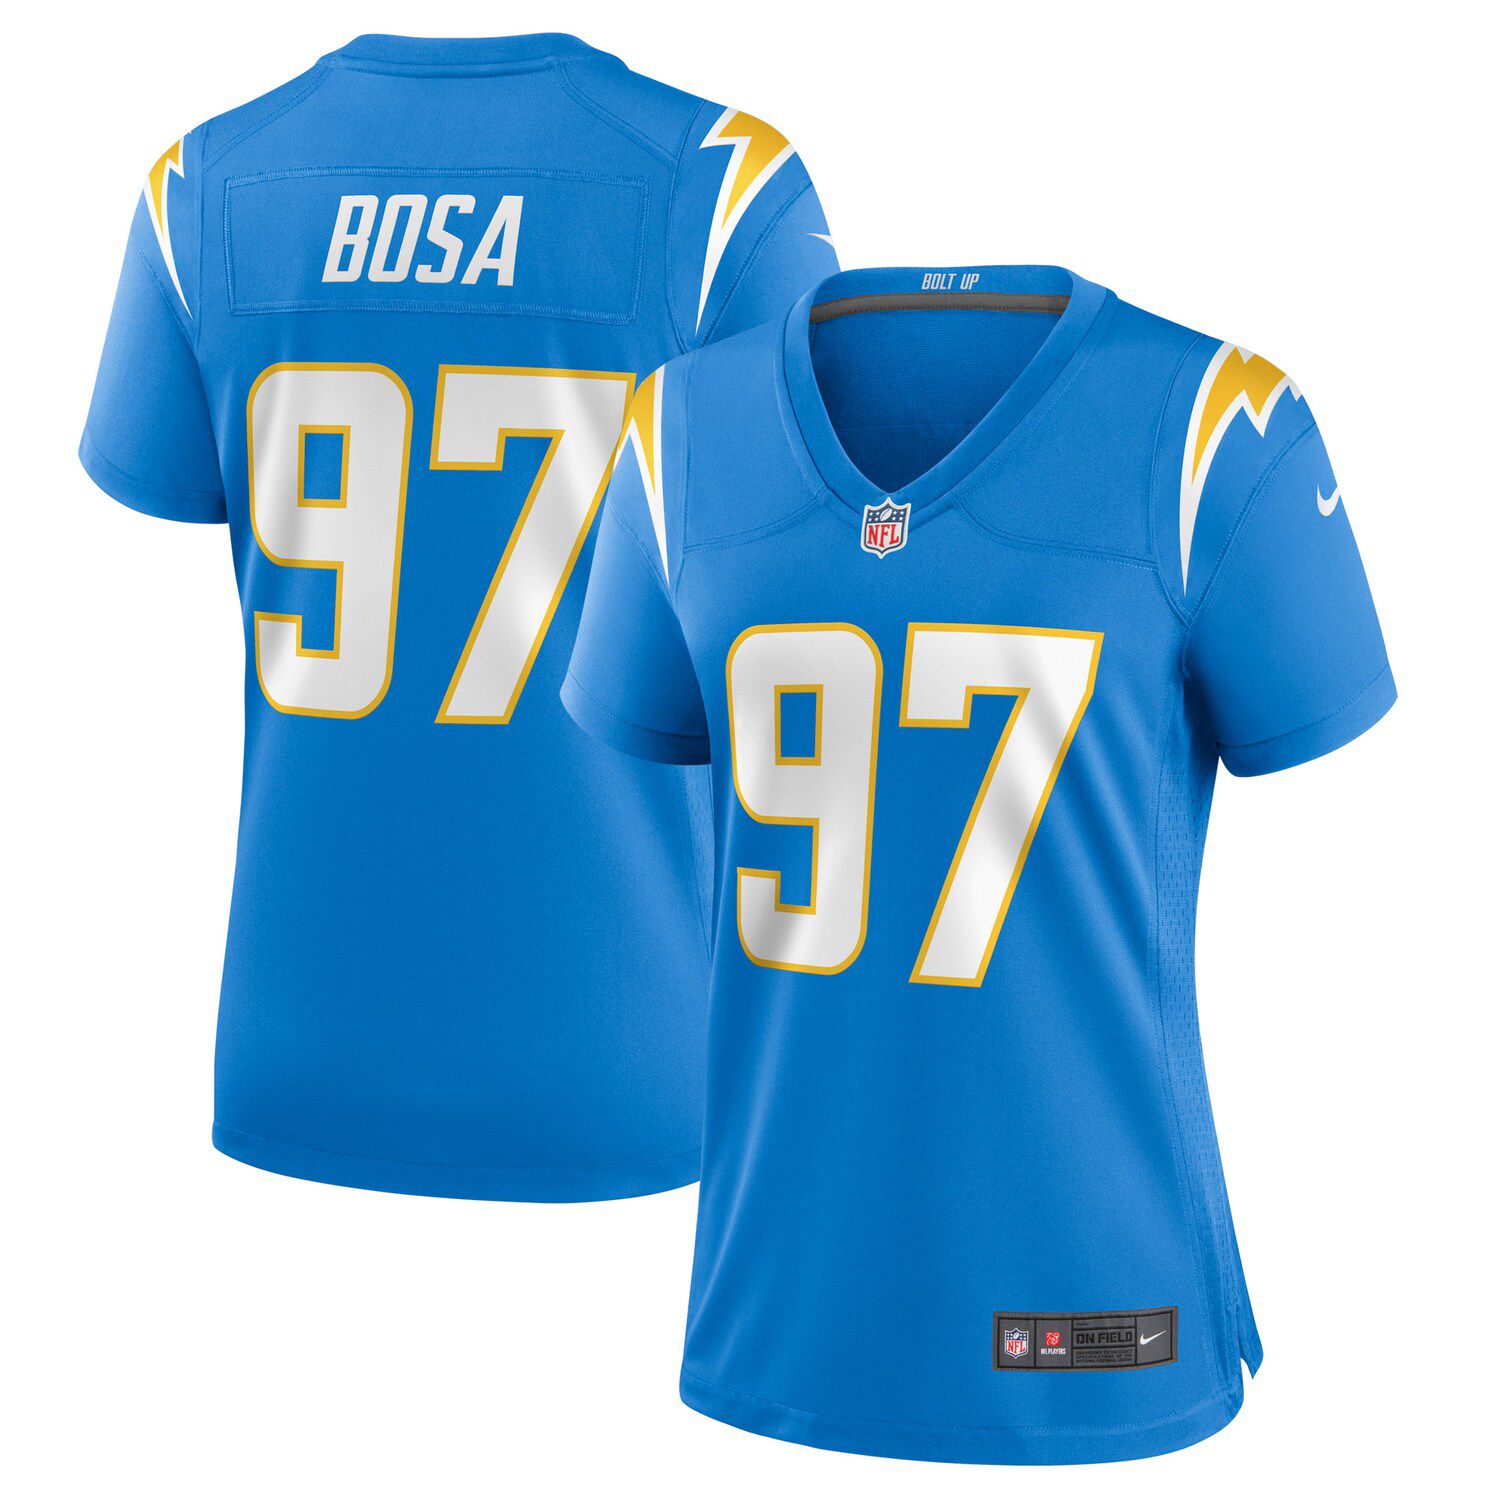 mens chargers jersey